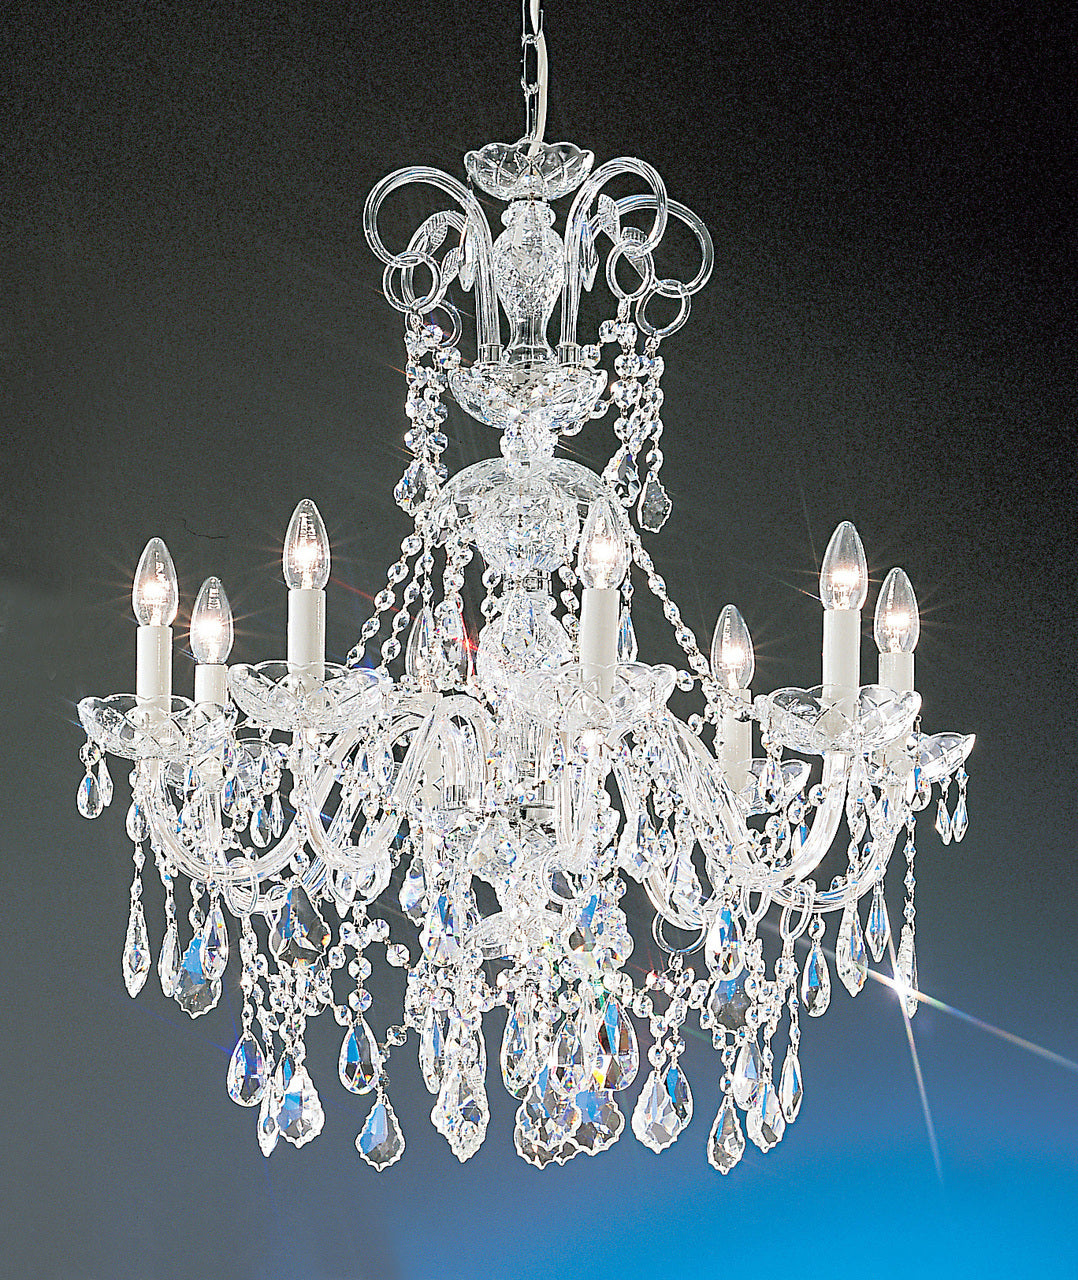 Classic Lighting 8261 CH S Bohemia Crystal/Glass Chandelier in Chrome (Imported from Italy)